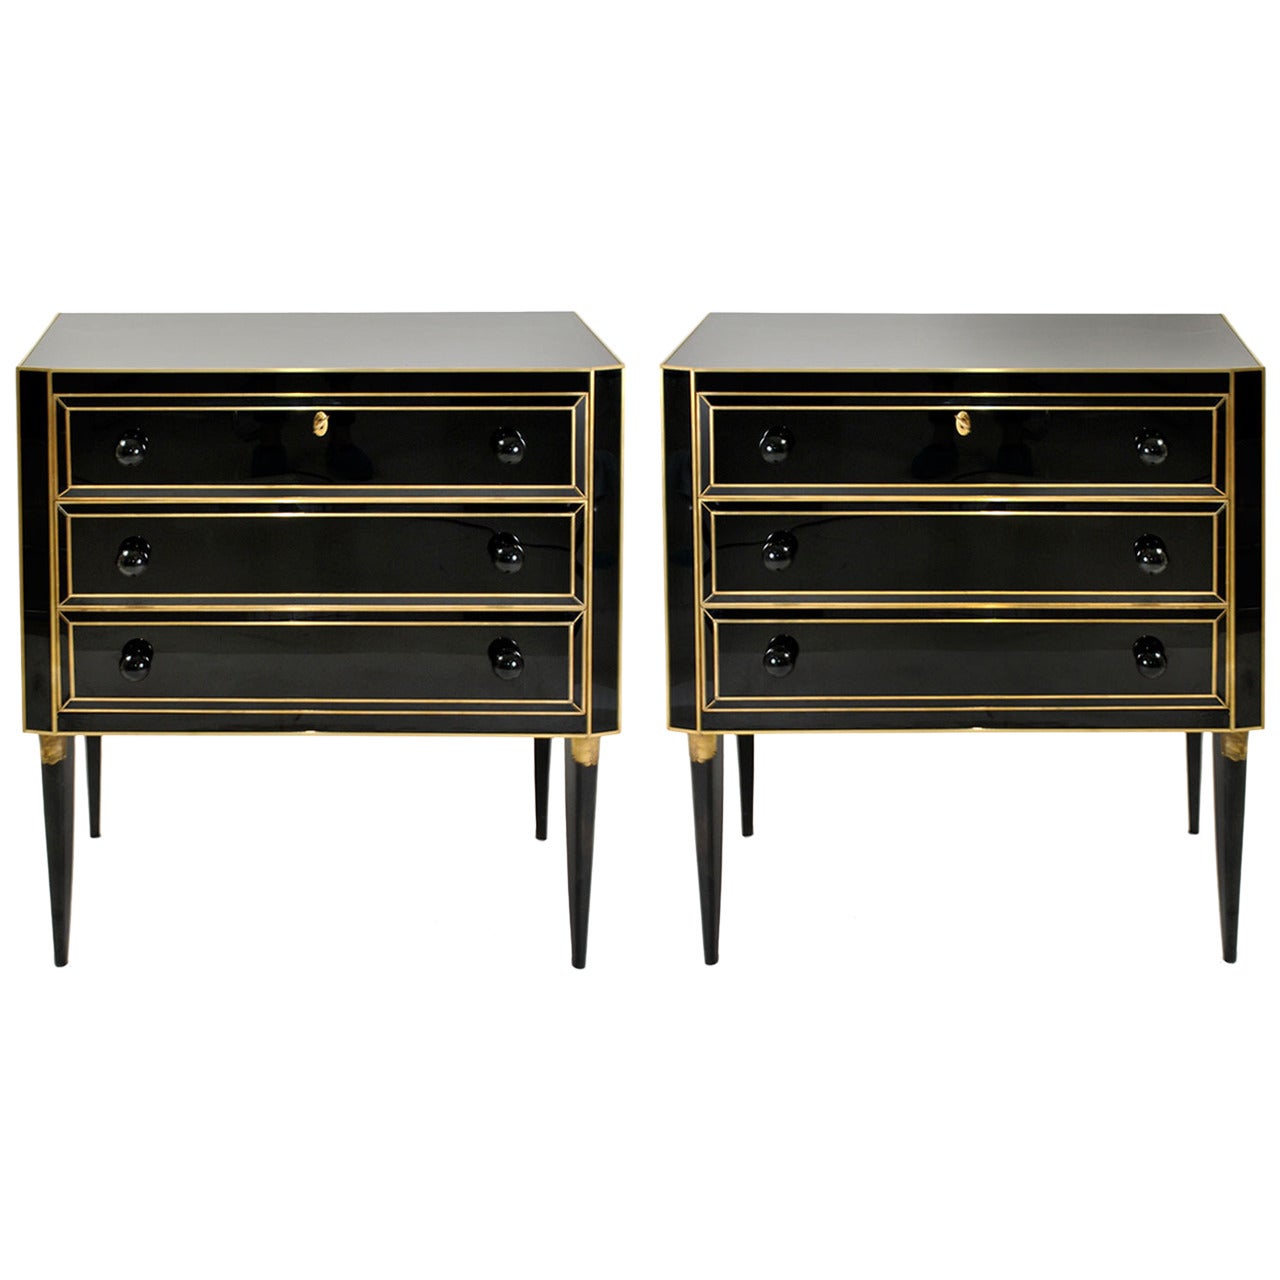 Pair of Commodes in Solid Wood and Murano